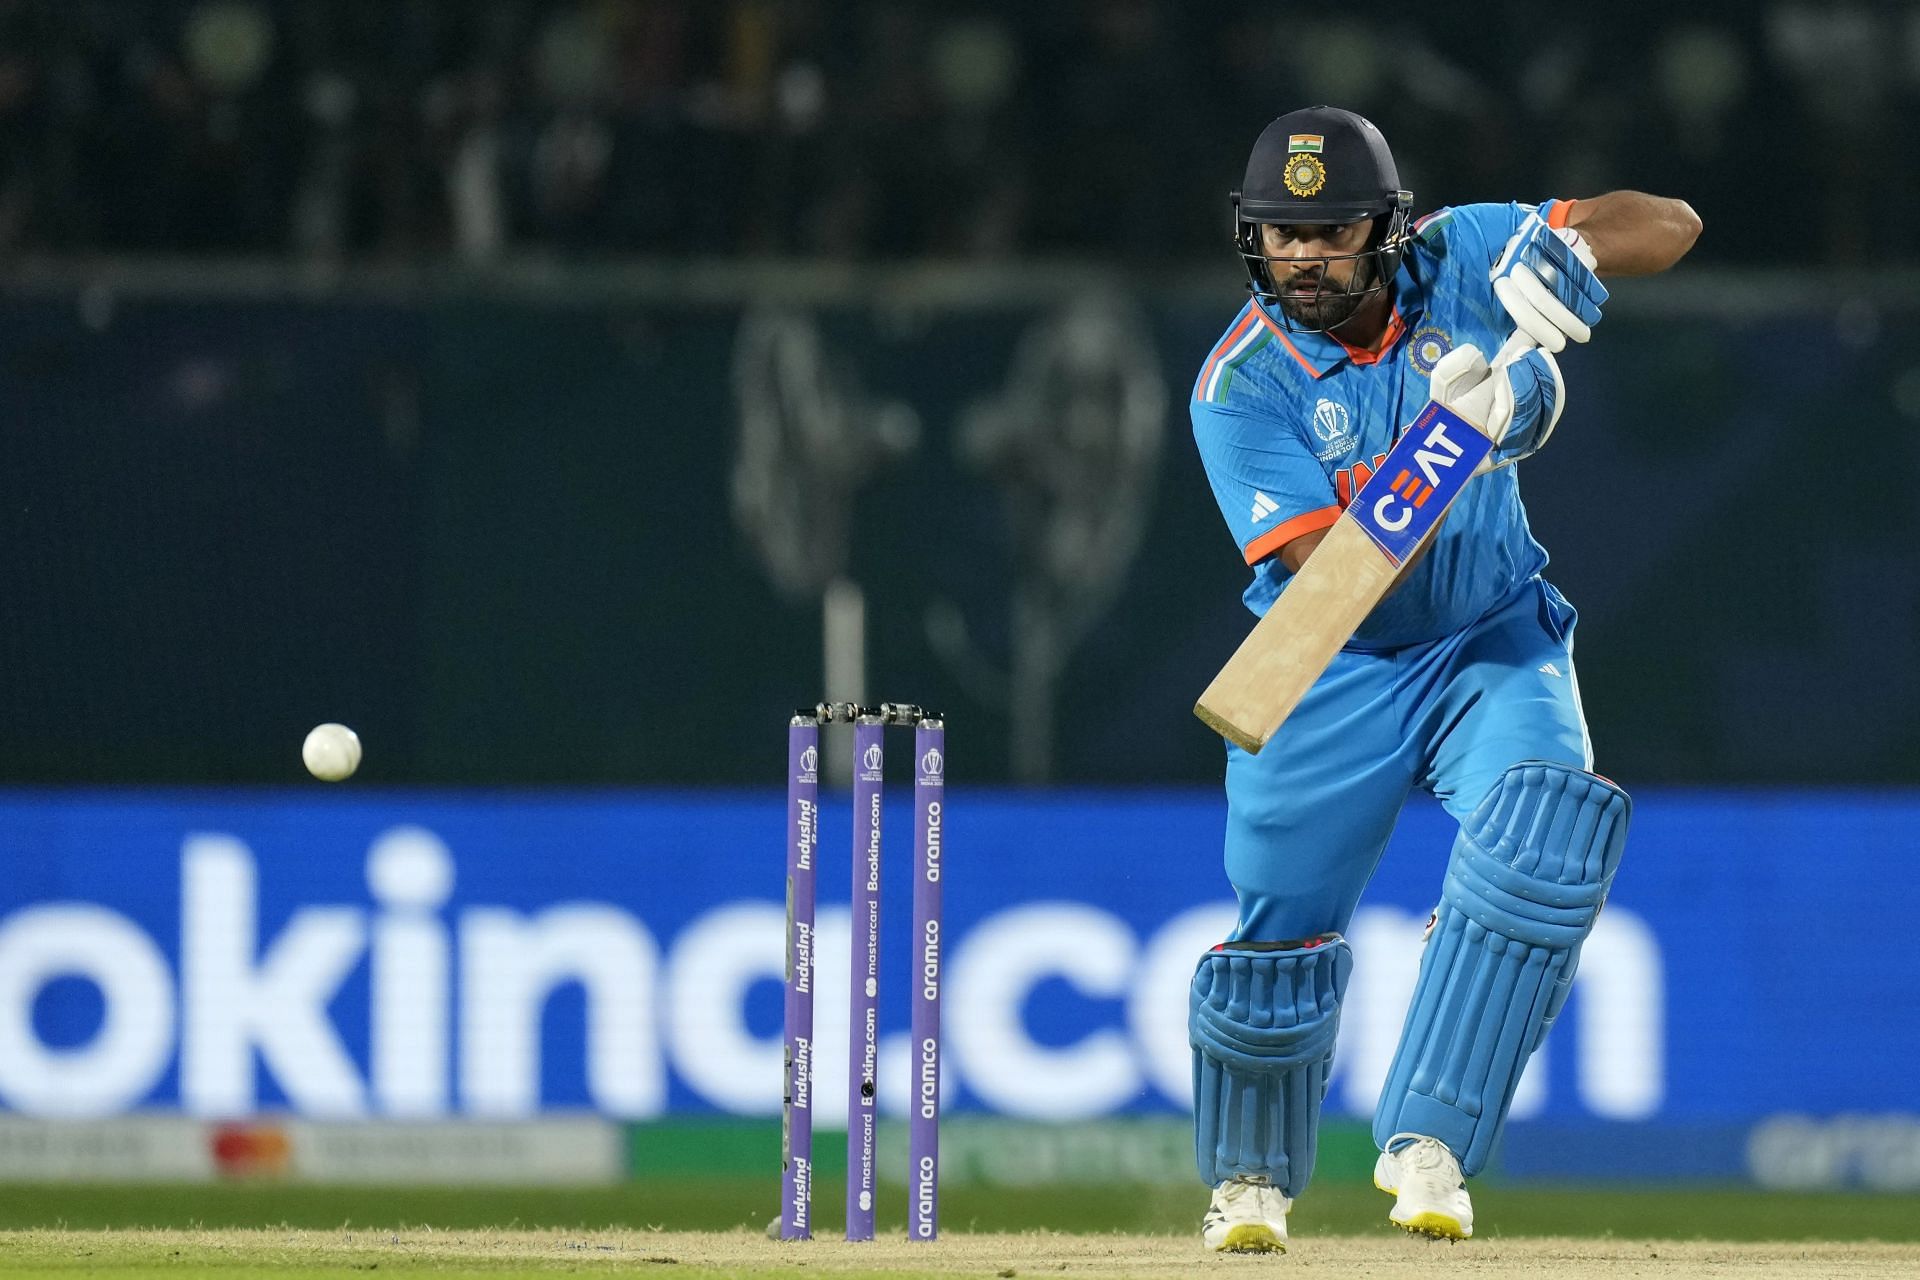 Rohit Sharma led from the front with a counterattacking knock